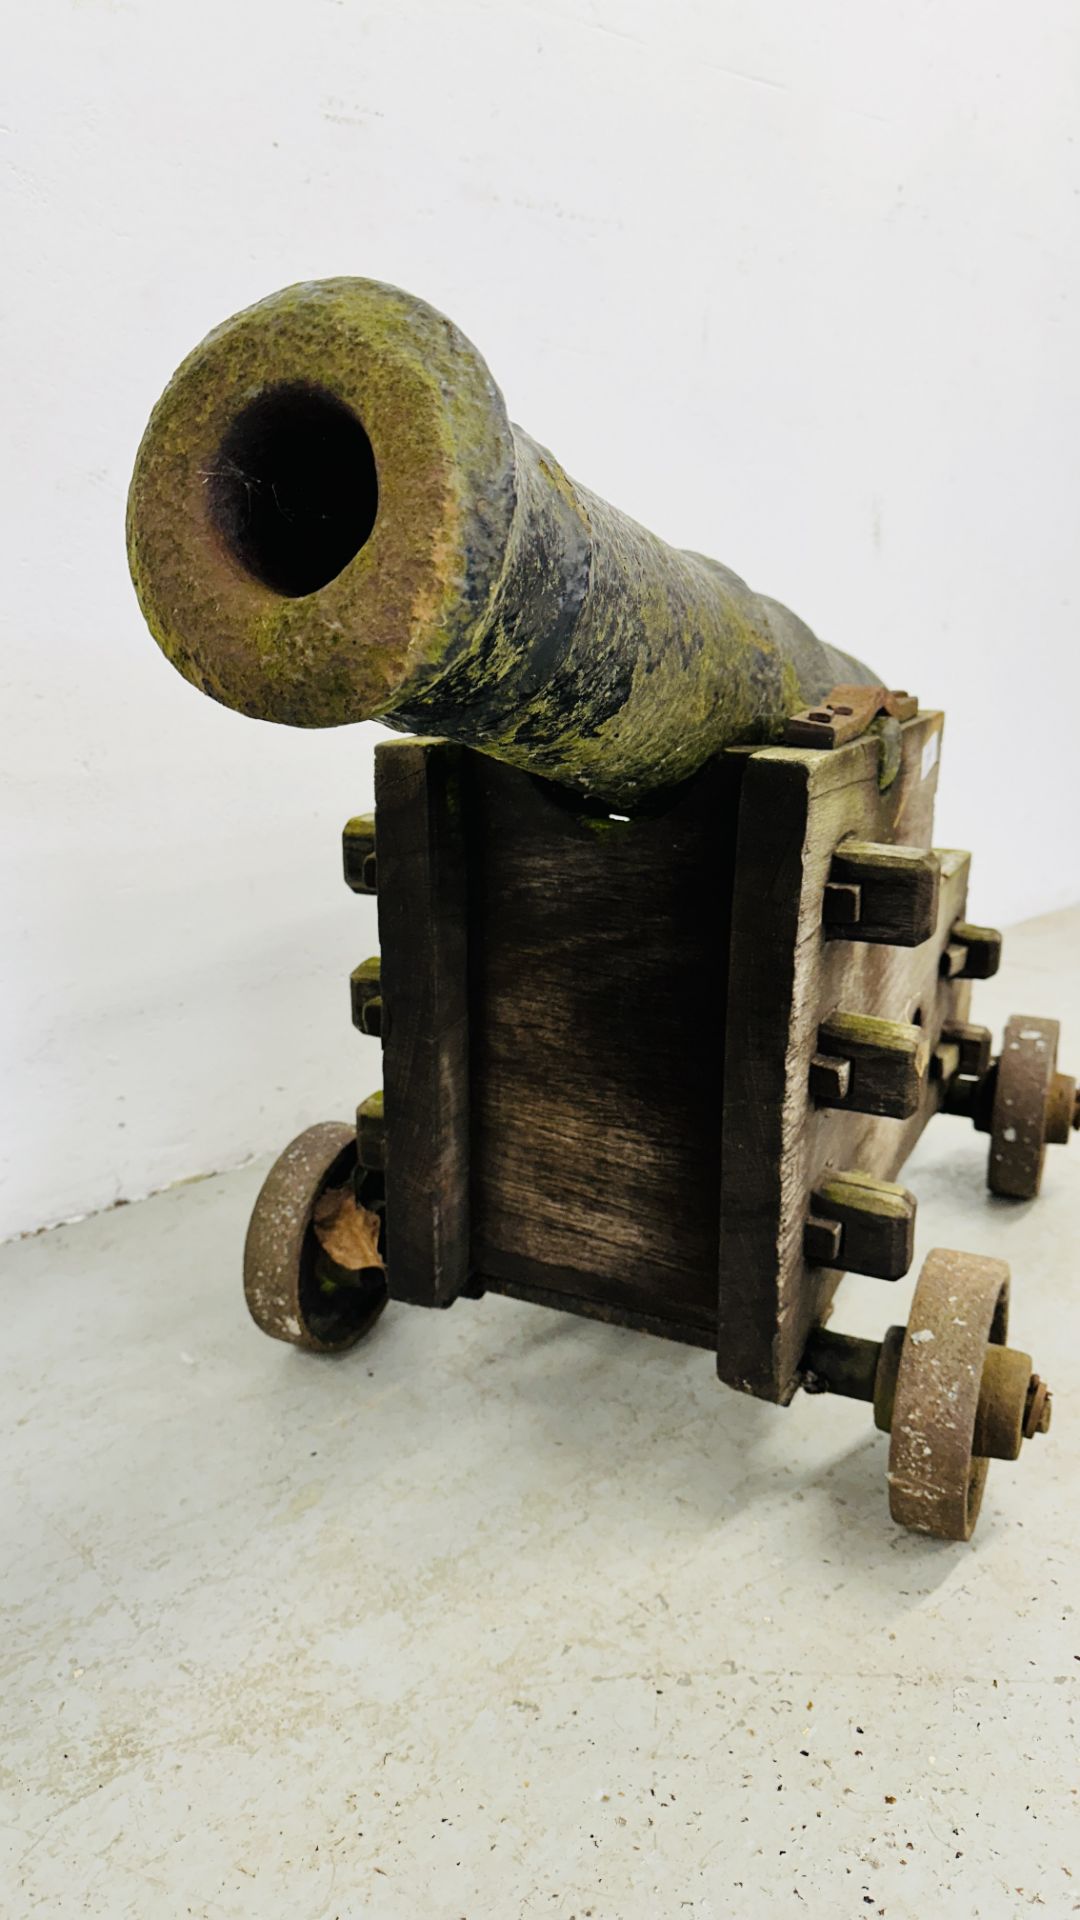 A GEORGE III CAST IRON NAVAL CANNON LENGTH 86CM ON LATER HARDWOOD STAND WITH CAST IRON WHEELS - - Image 12 of 18